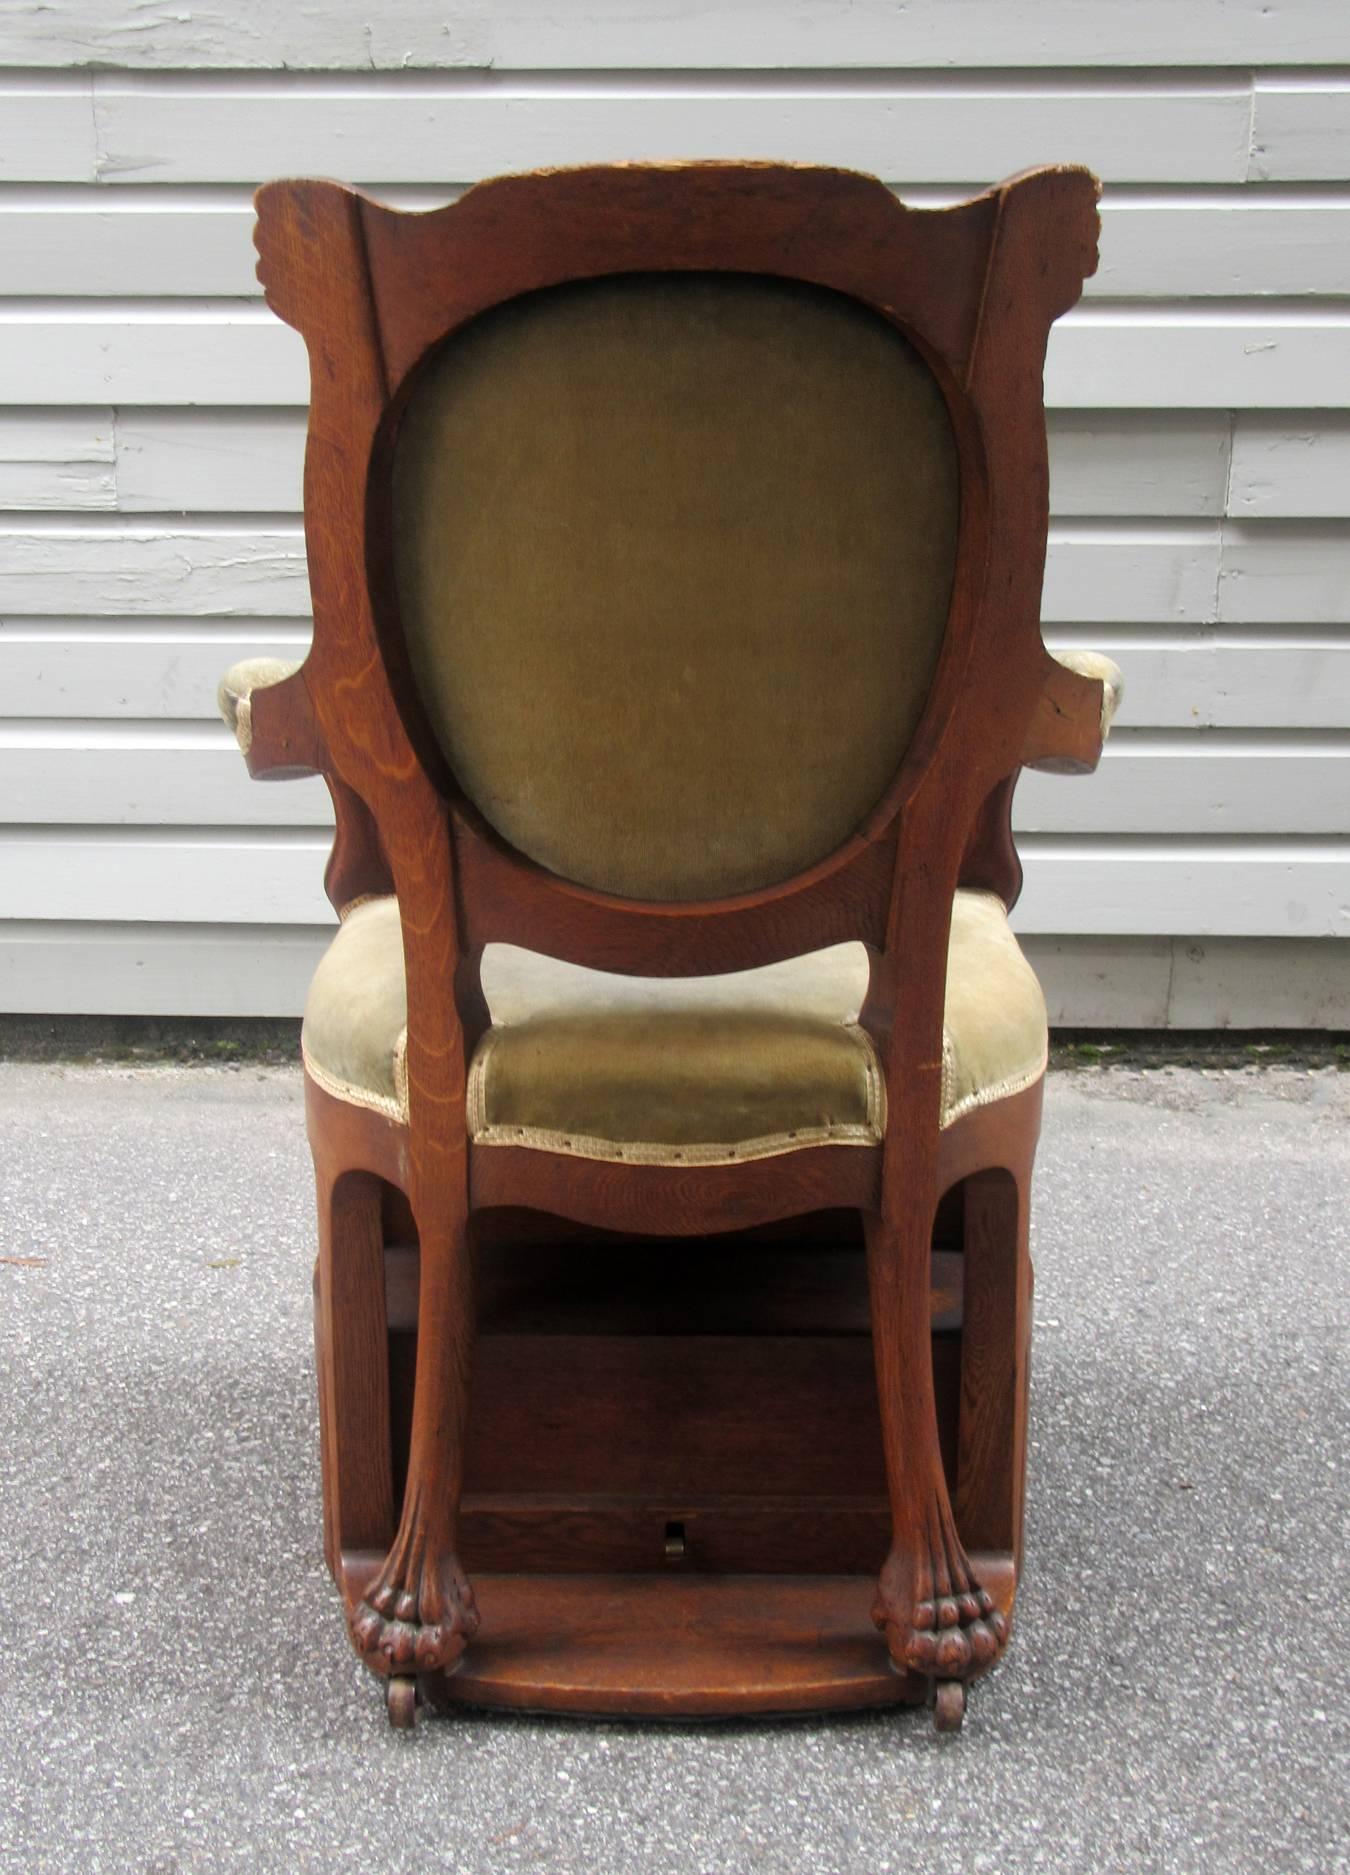 Gothic Mid-19th Century Boston Oak Metamorphic Library Step Chair by Maker a. Eliaers